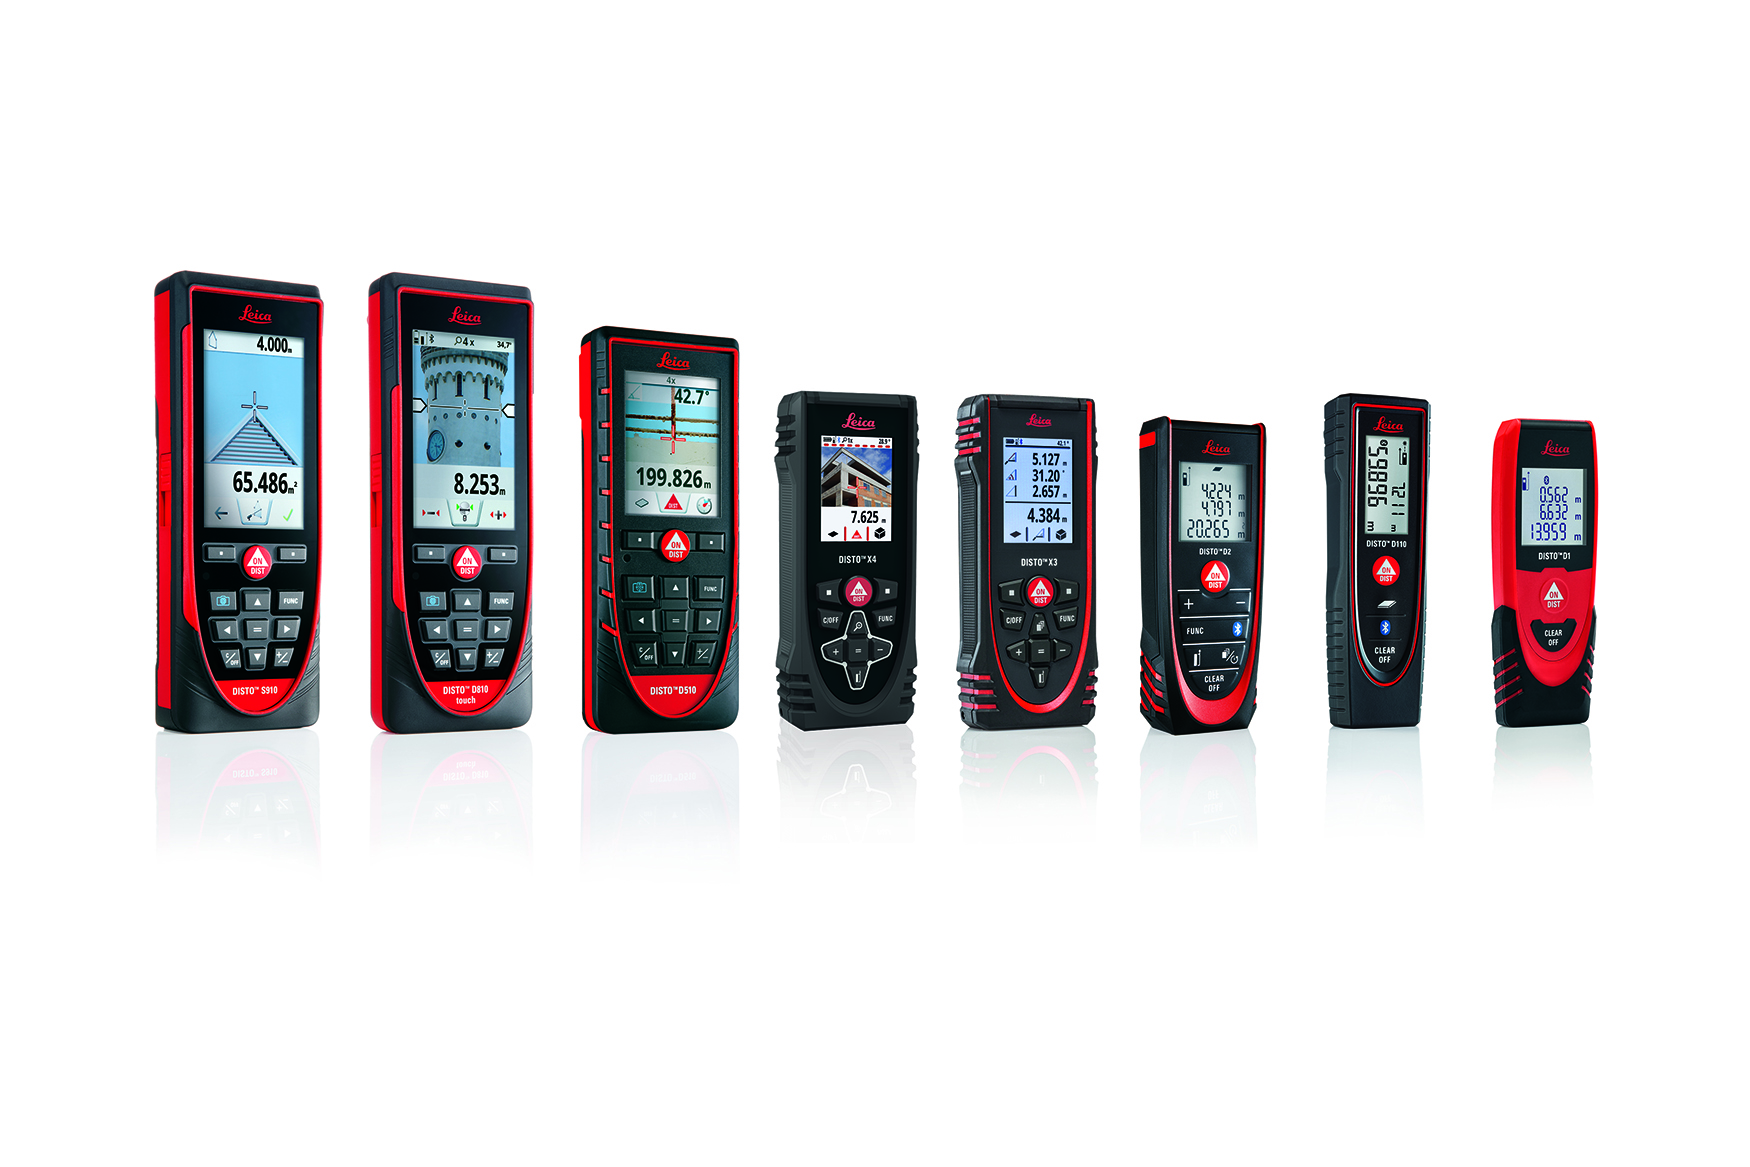 Leica DISTO series consisting of 8 laser measures with different functionality and size